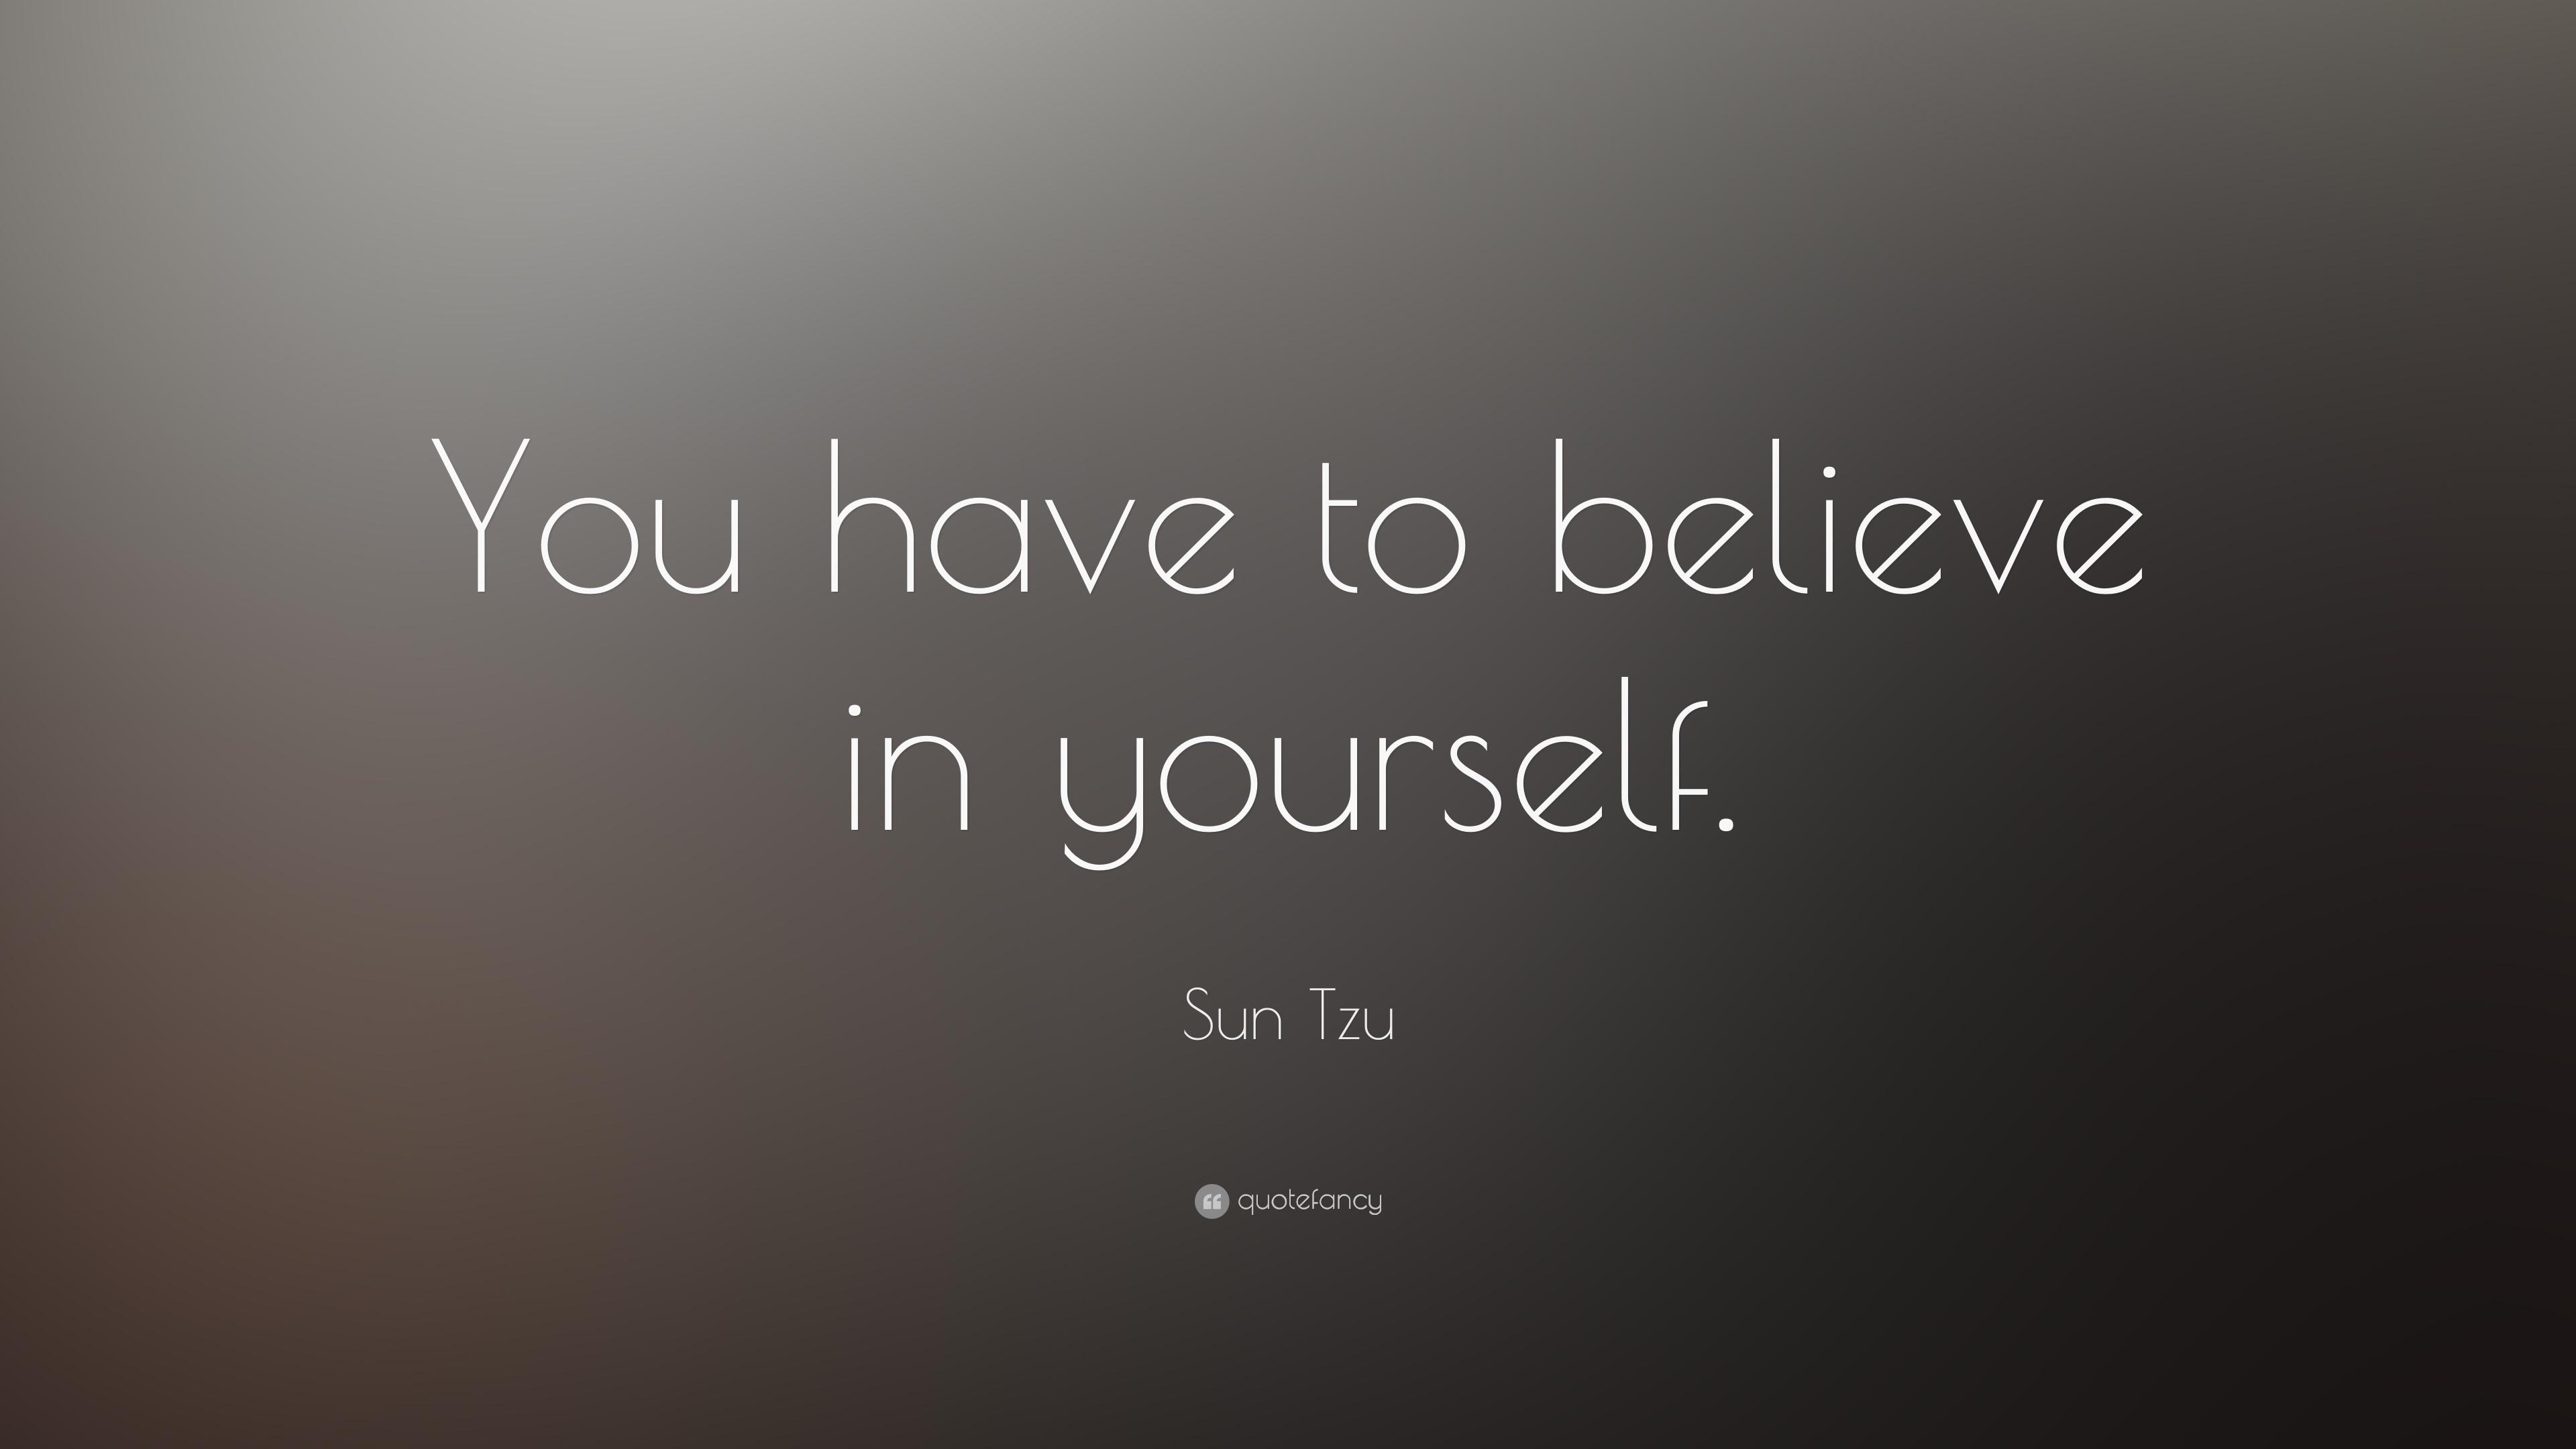 Sun Tzu Quote: “You have to believe in yourself. ” 23